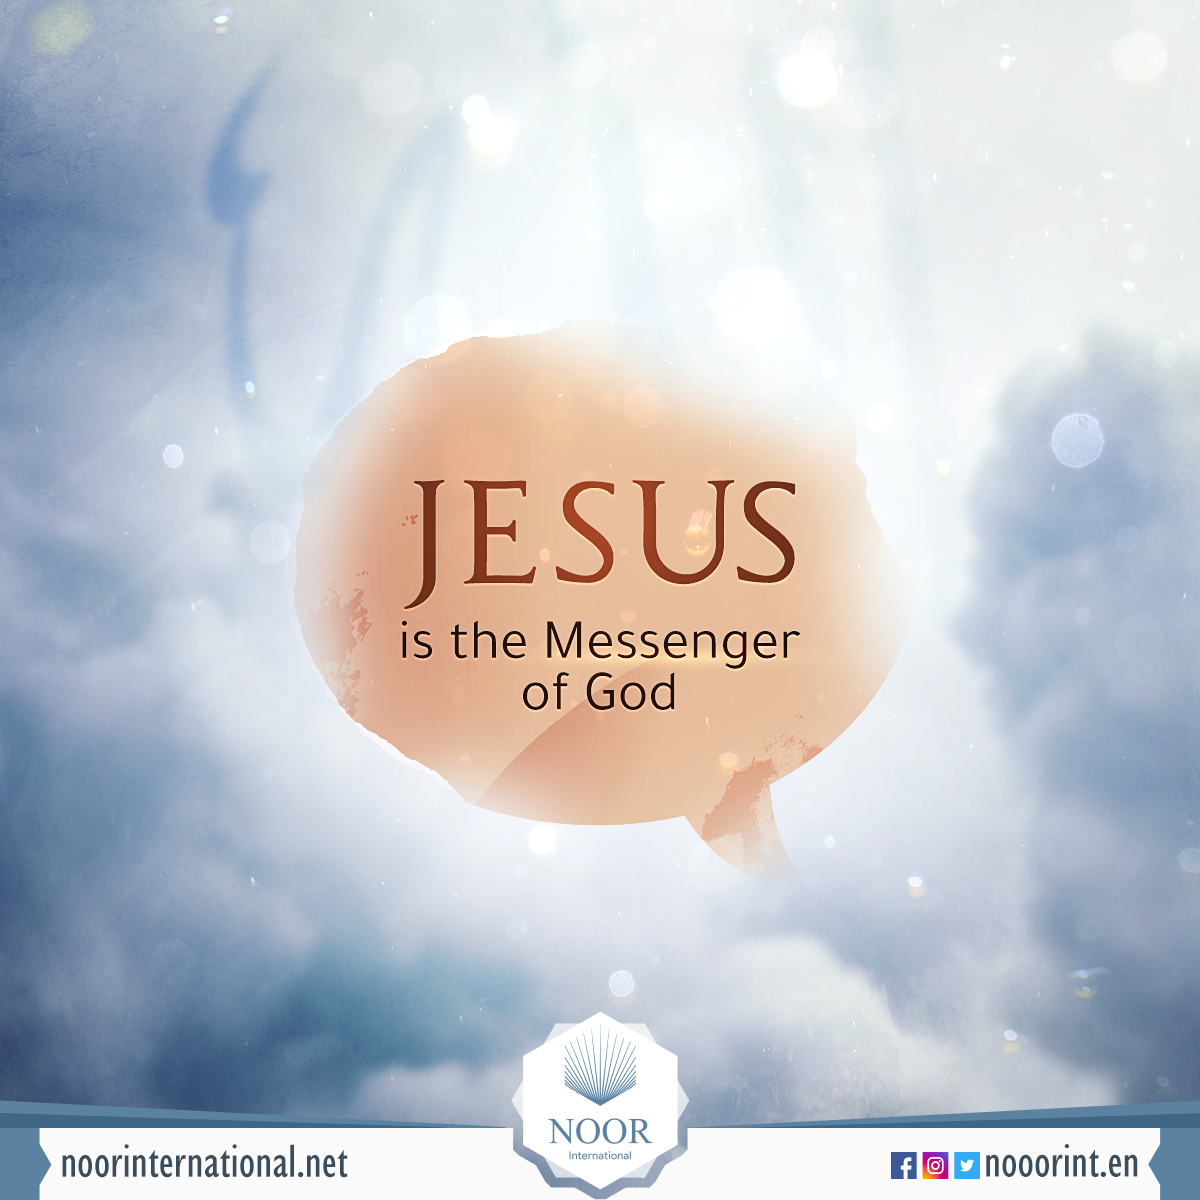 The Christ is the Messenger of God